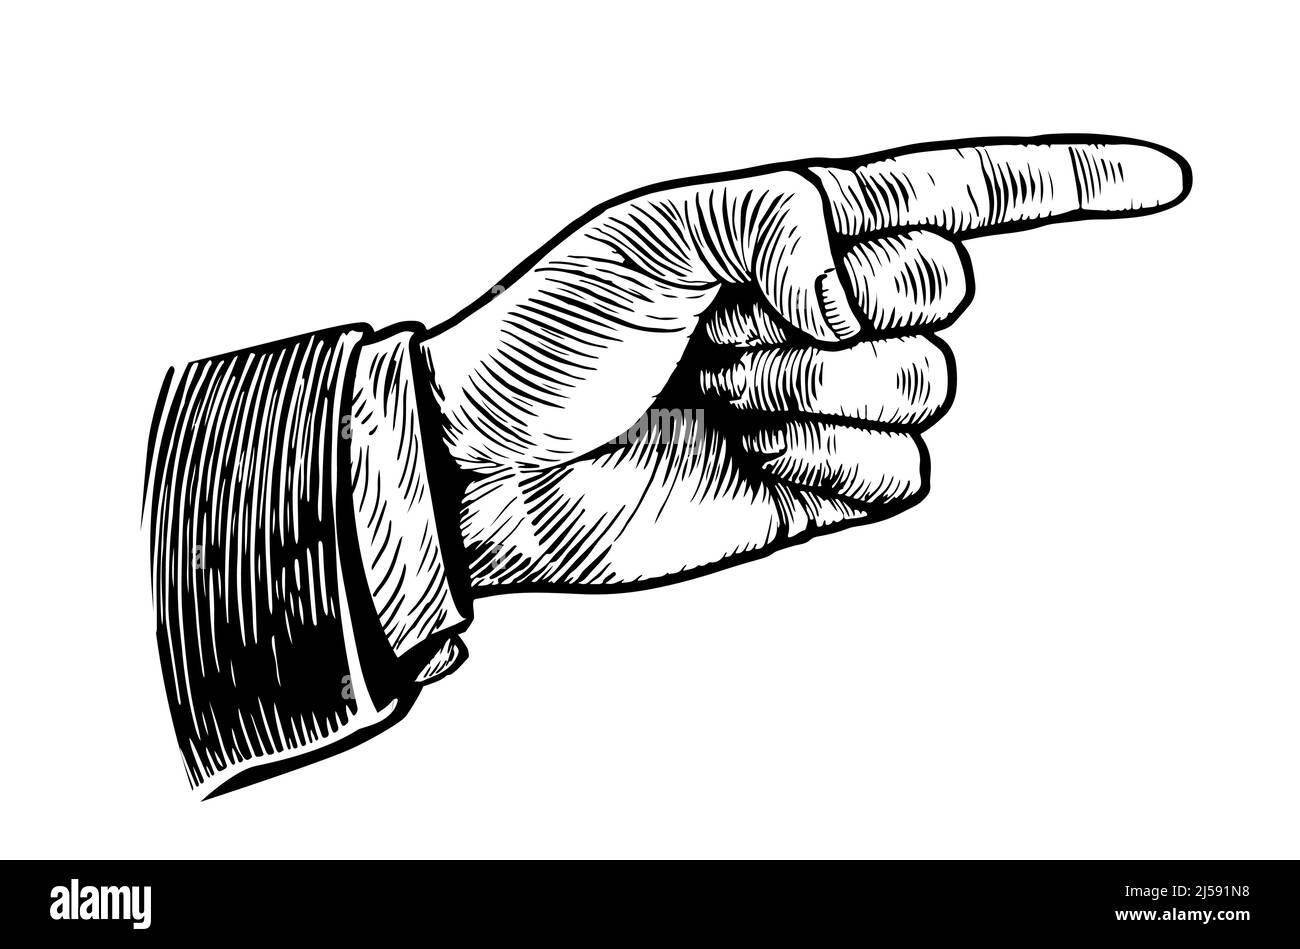 Retro pointing hand. Hand drawn sketch in vintage style. Vector illustration Stock Vector